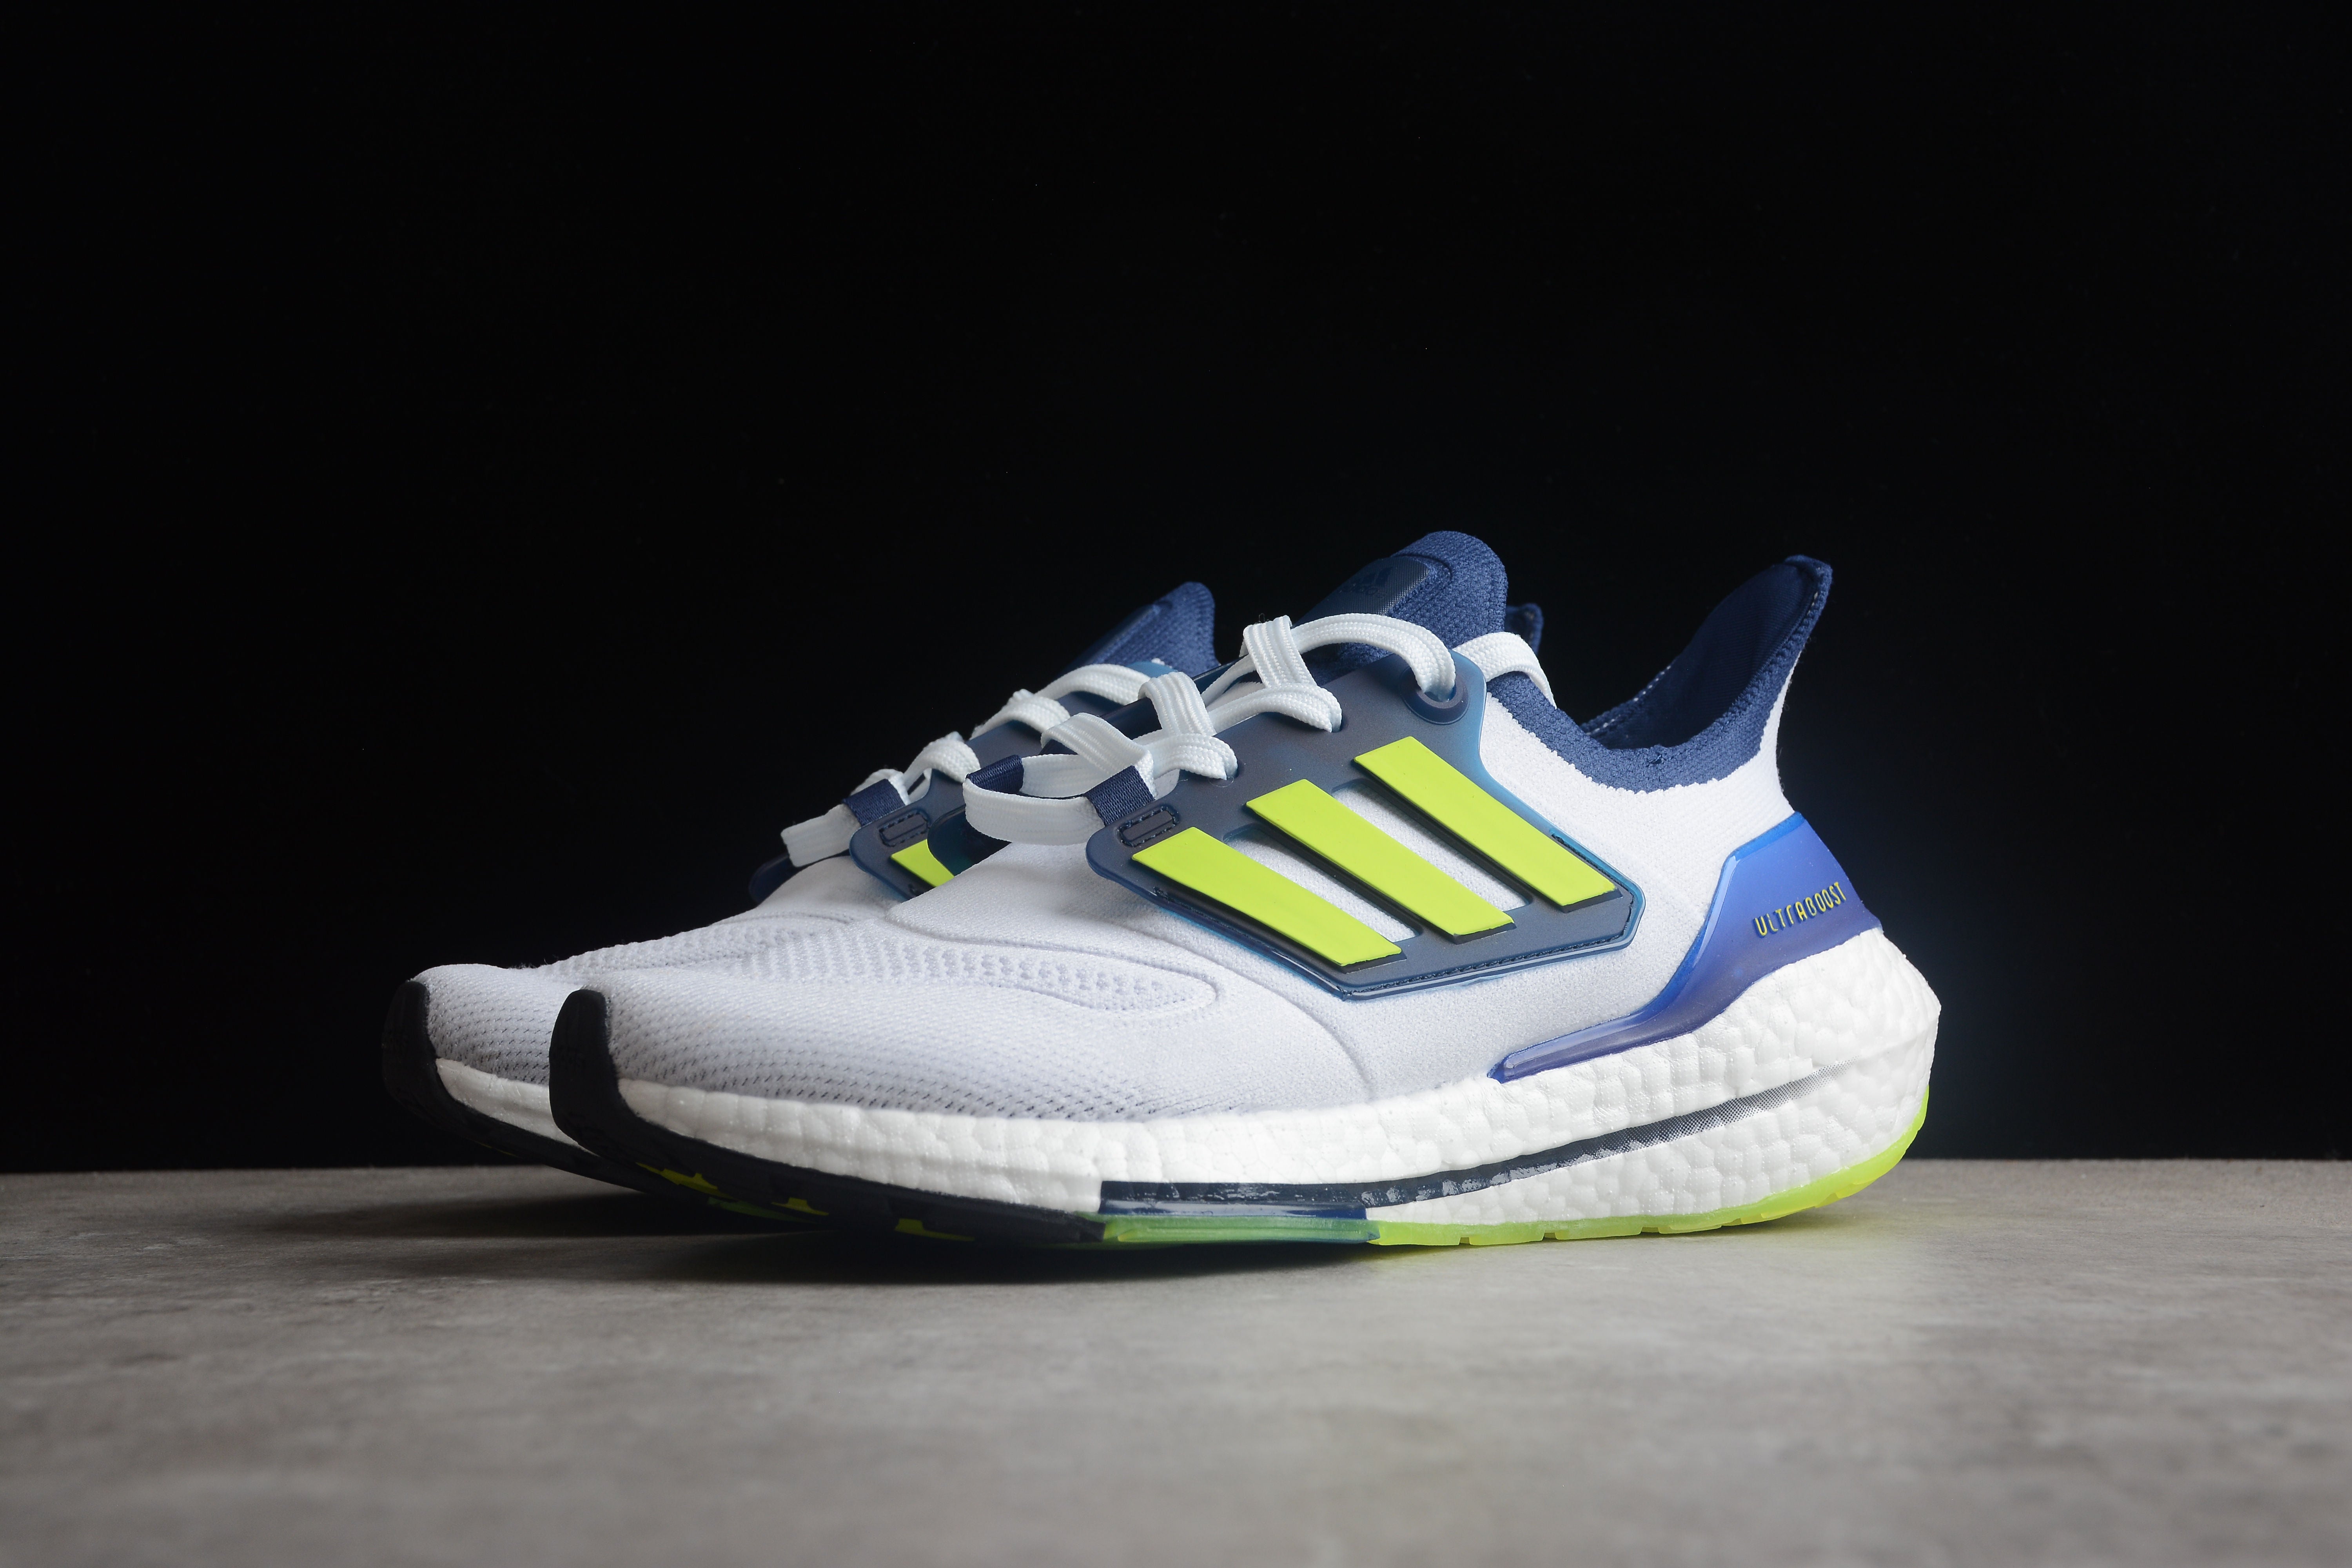 Adidas ultraboost white/yellow /blue shoes